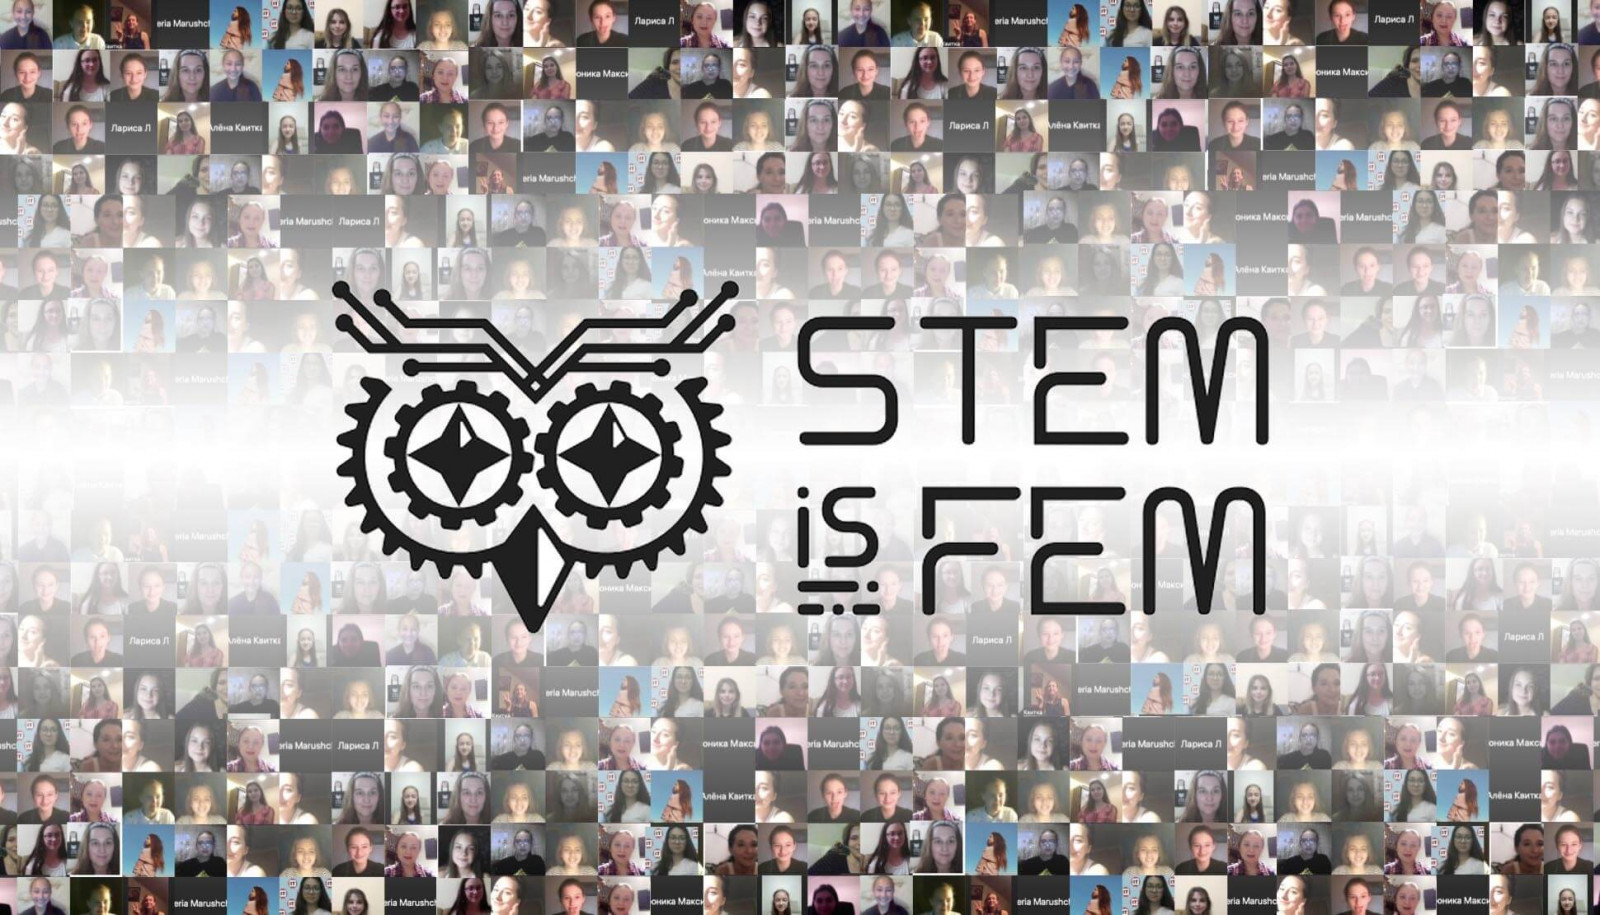 3D Modeling and Printing: the fifth STEM is FEM module took place online